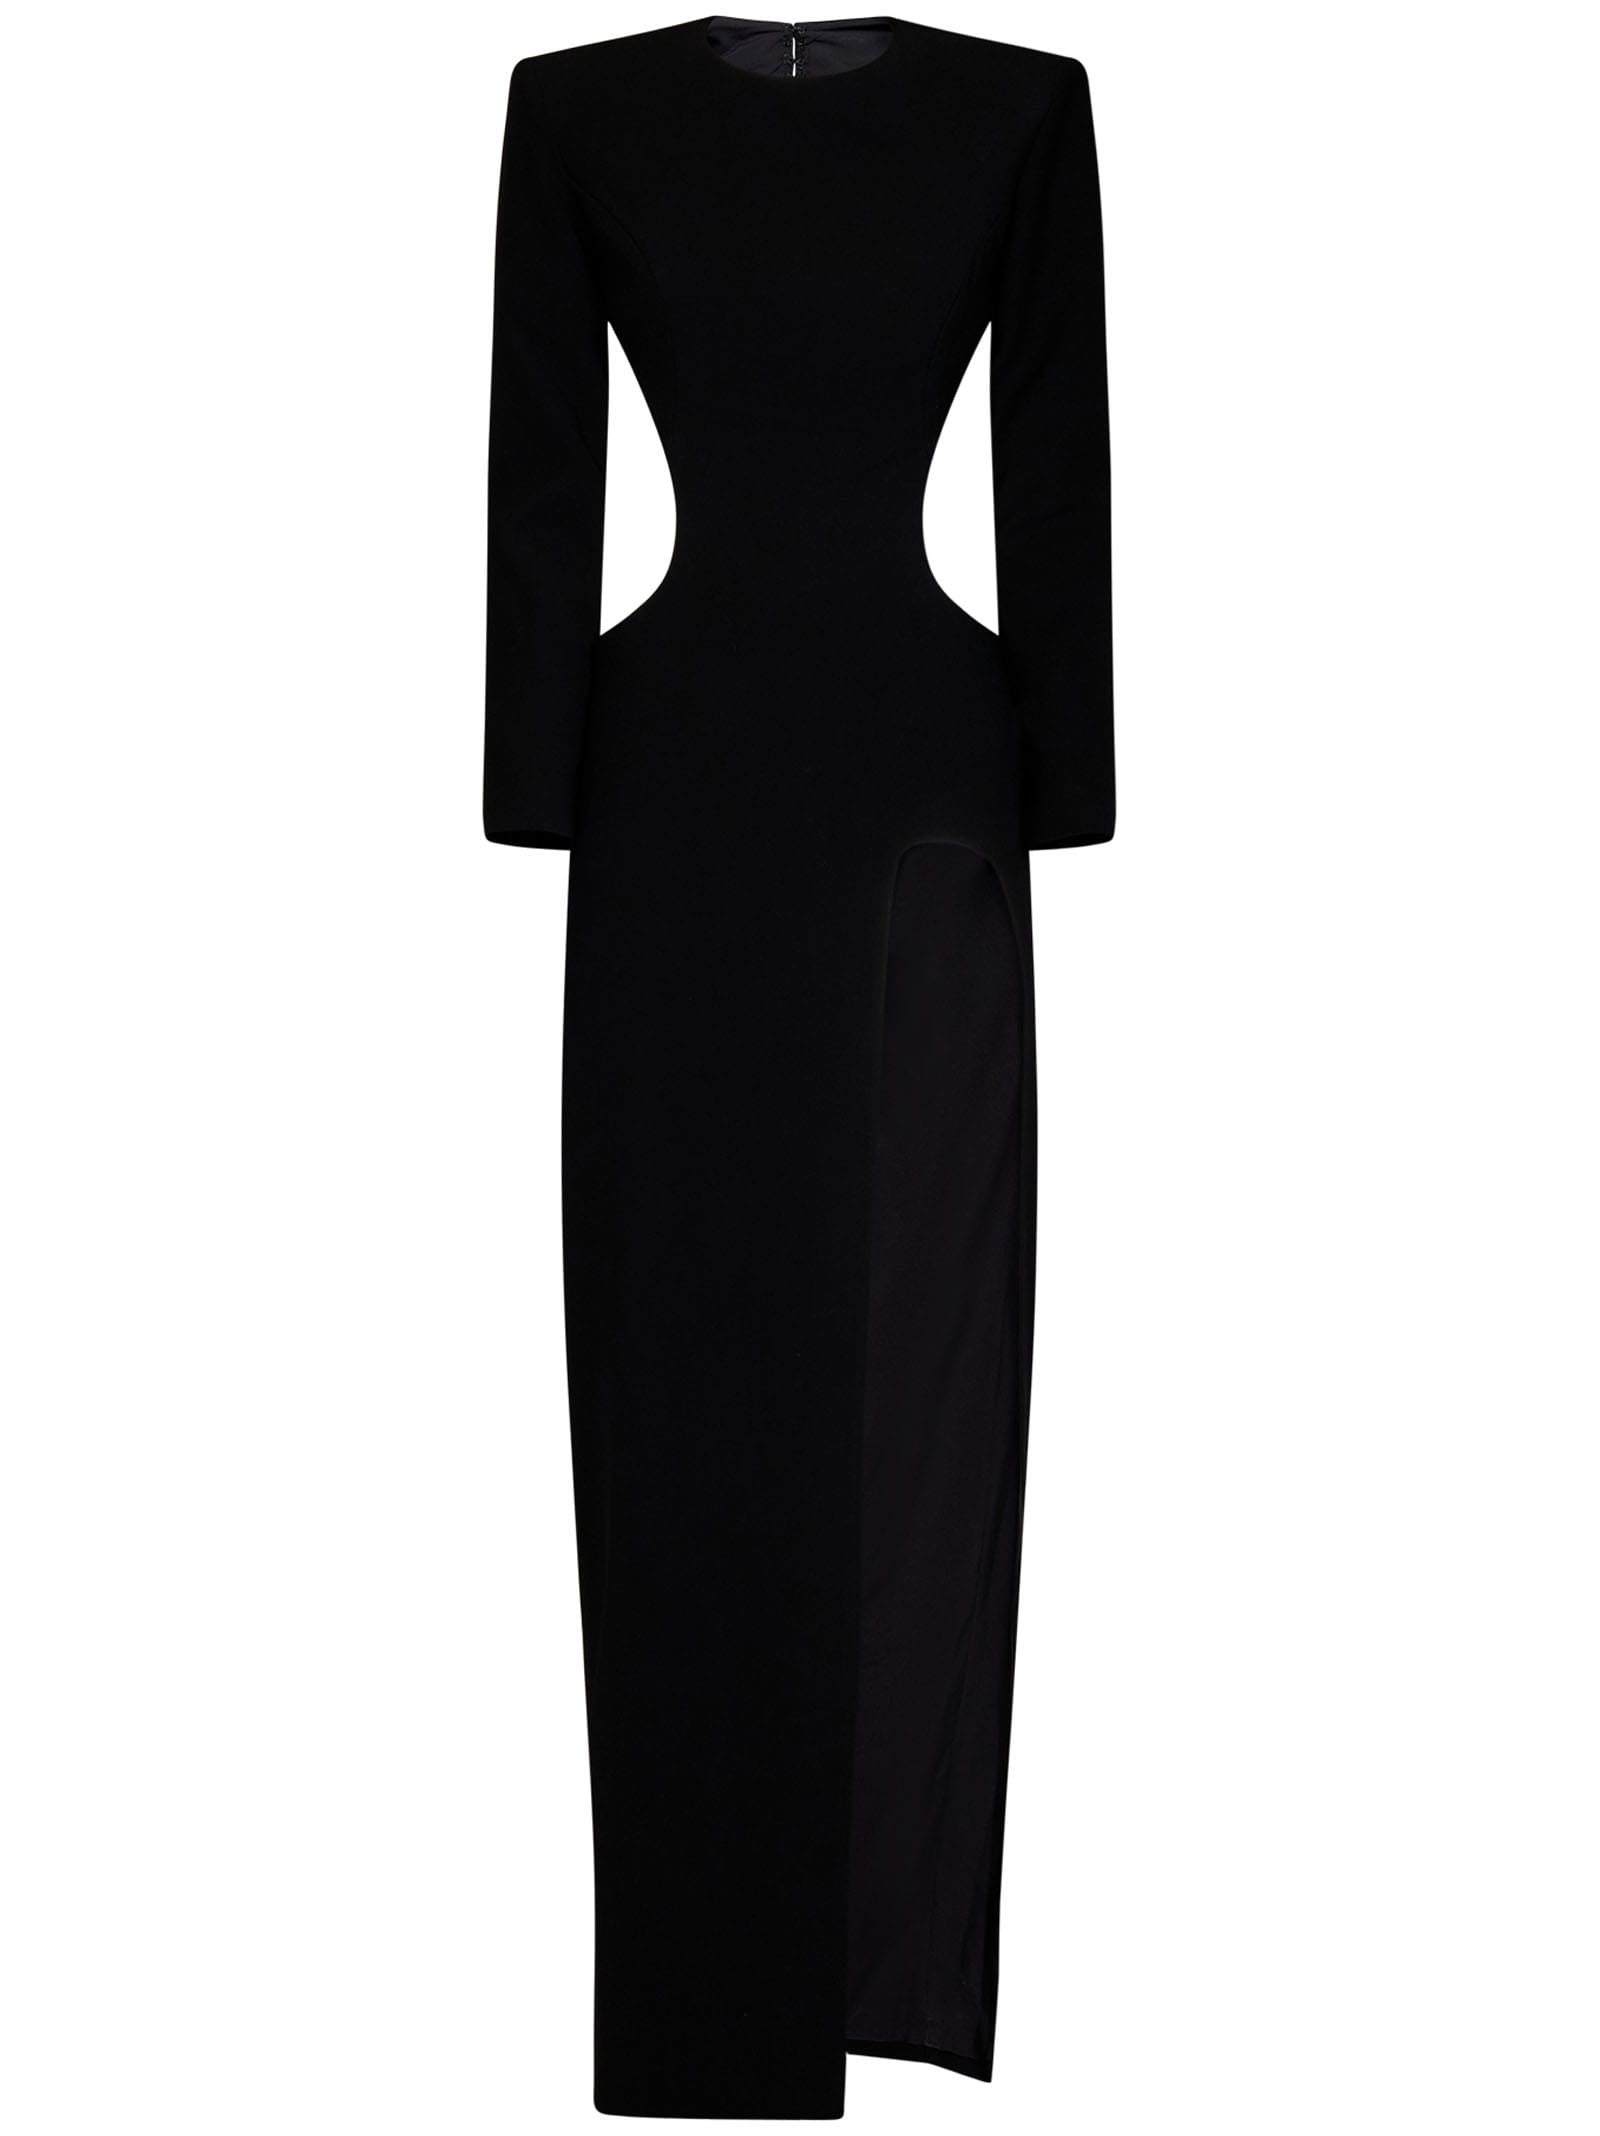 MONOT Bow Cutout Dress in Black